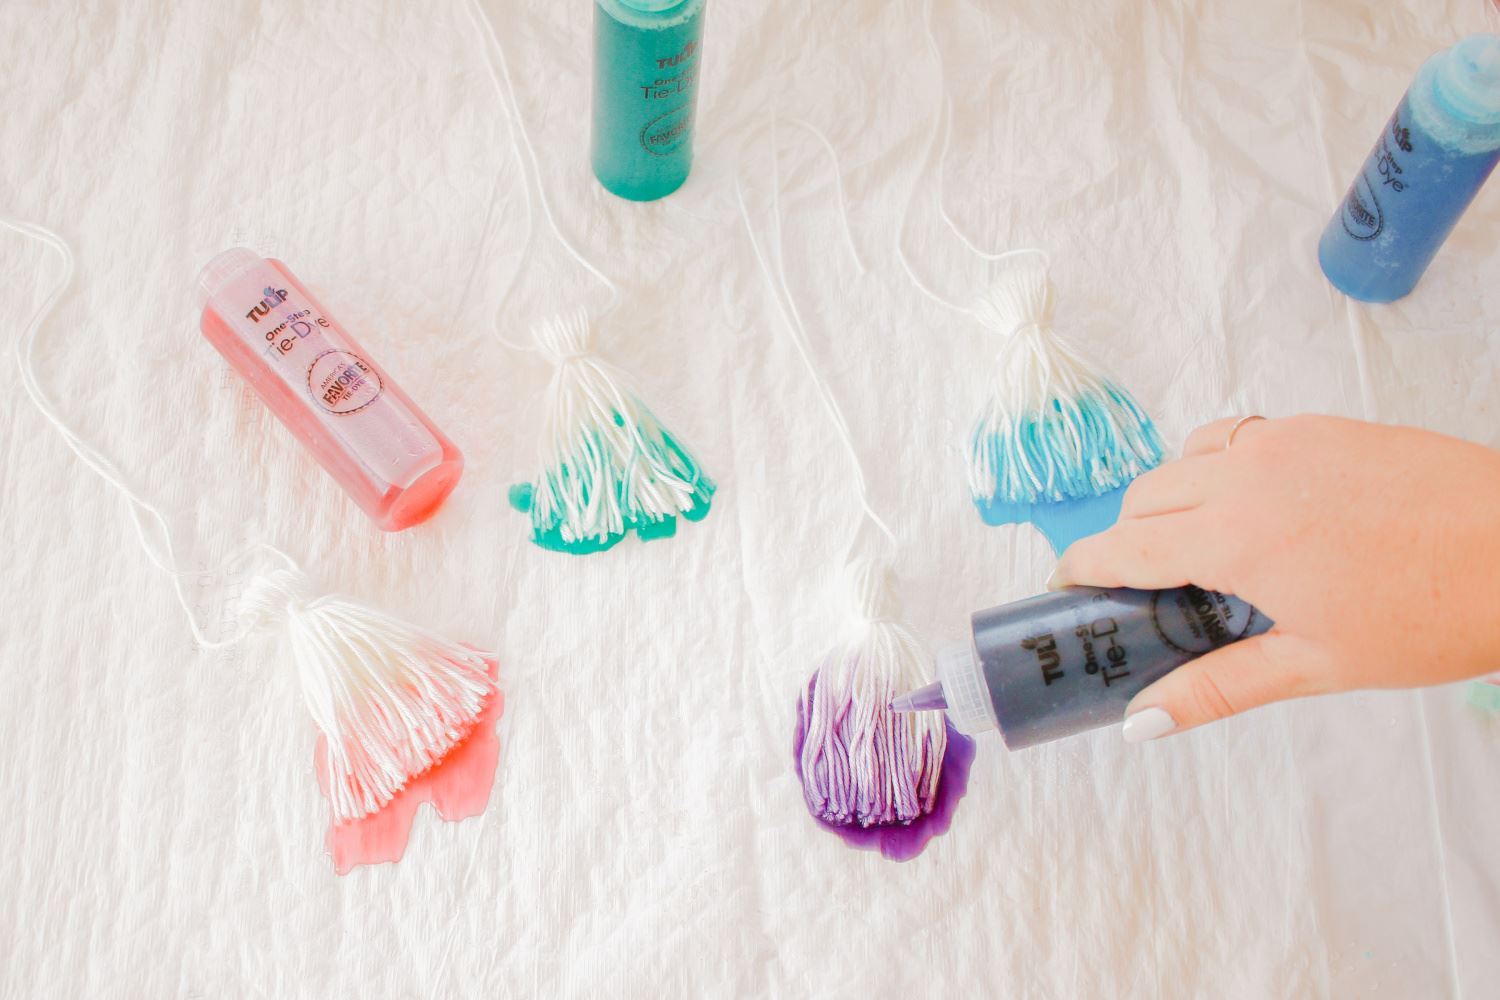 Squeeze dyes onto tassels